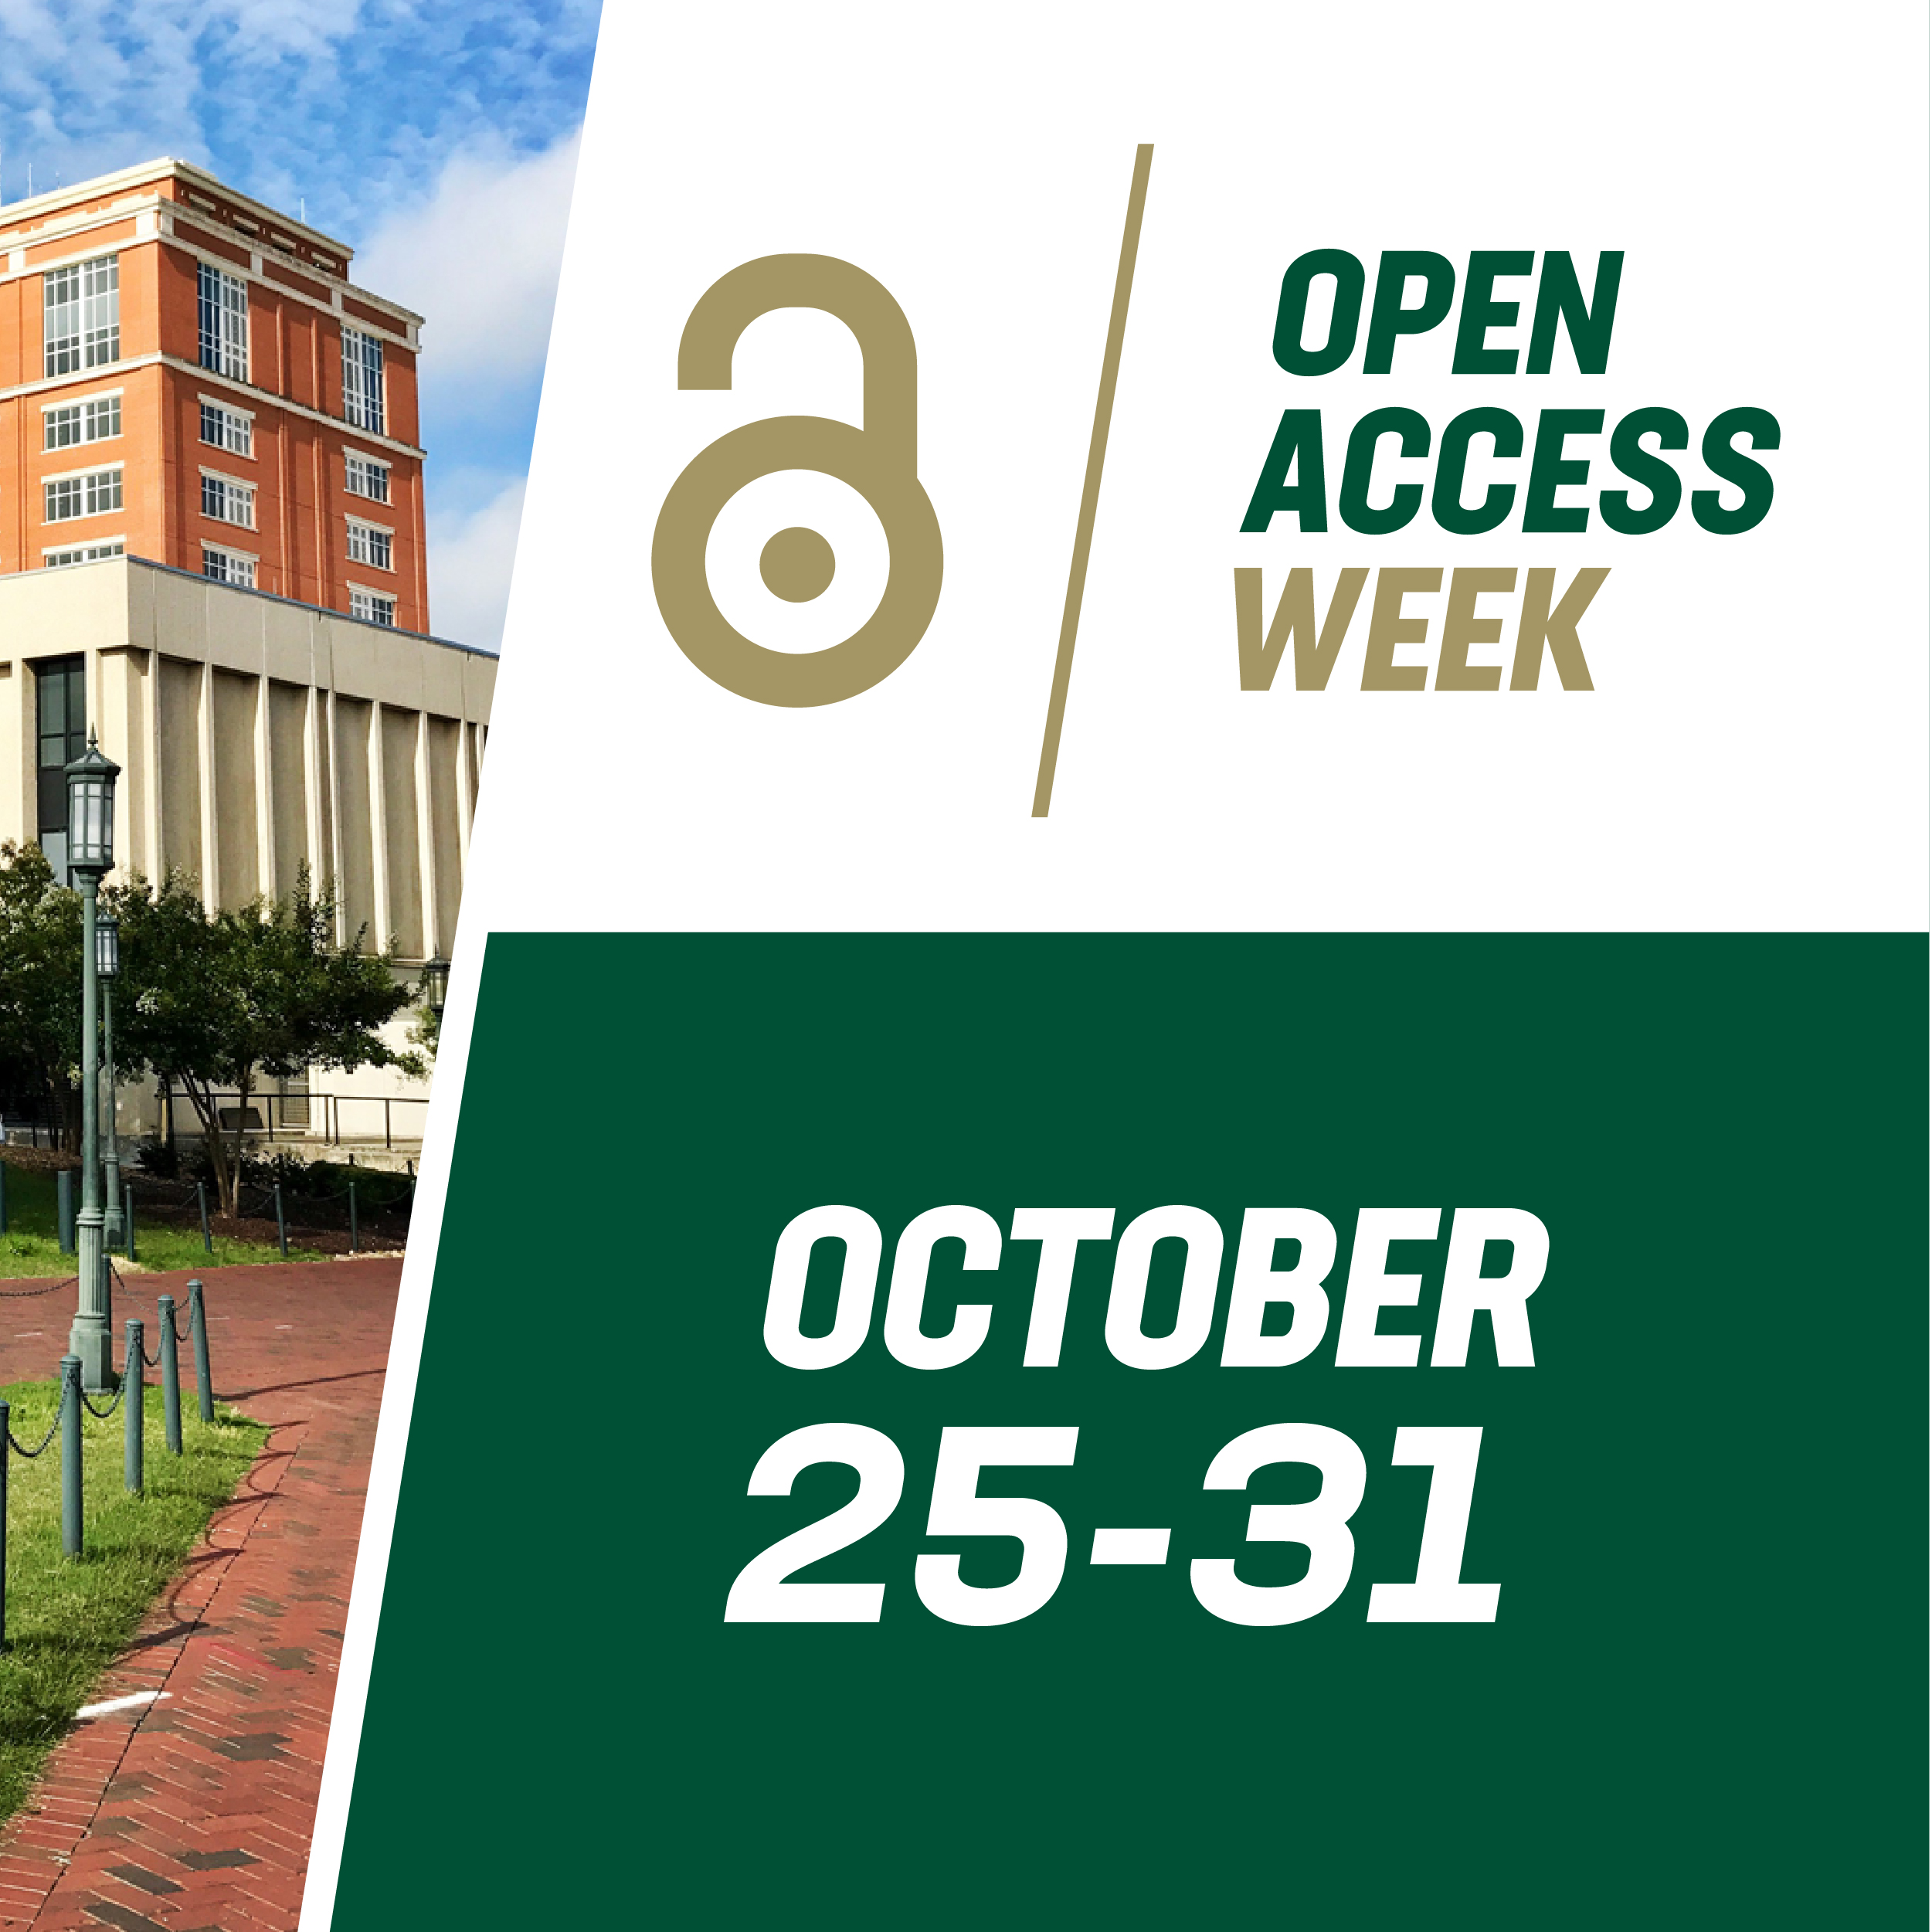 Open Access Week logo, with dates October 25-31